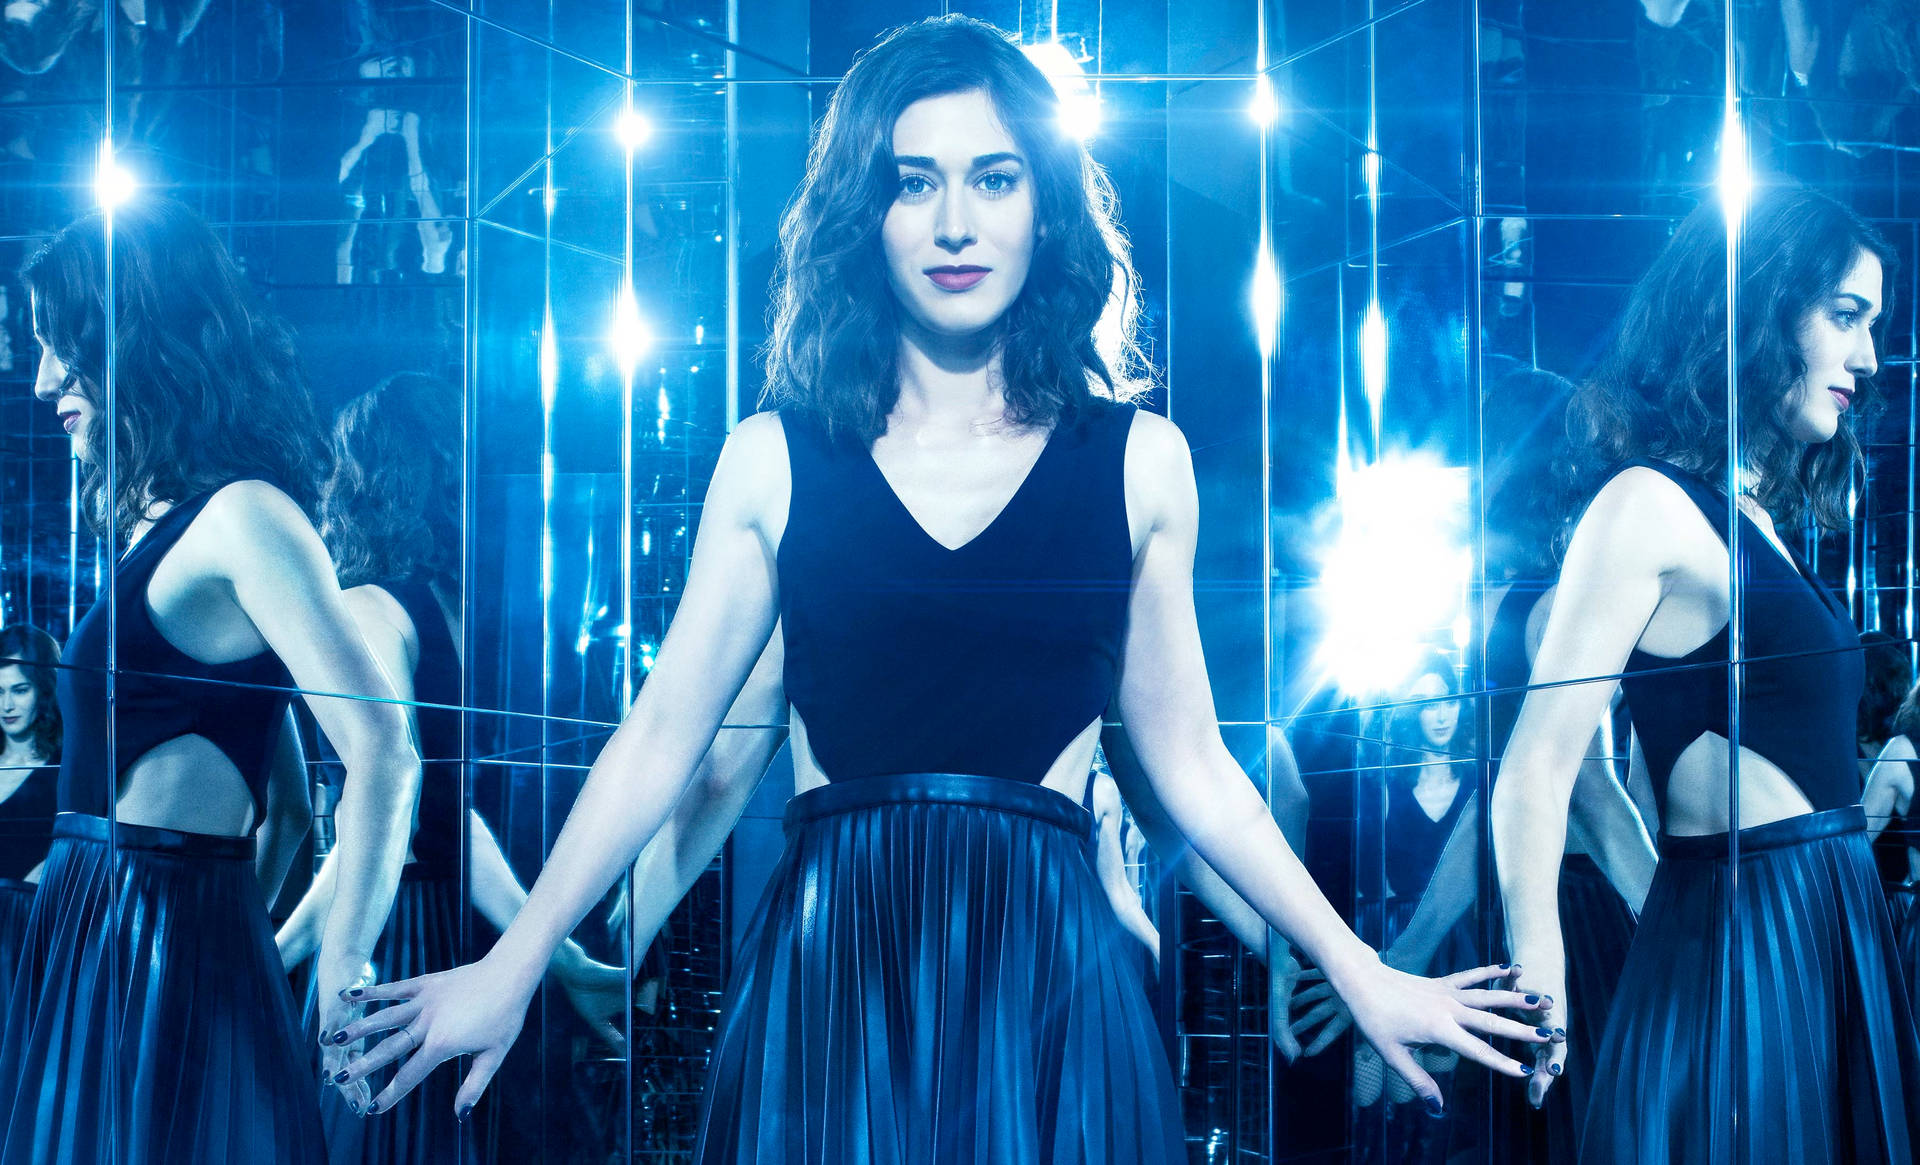 Lizzycaplan In Now You See Me 2: Lizzy Caplan In 